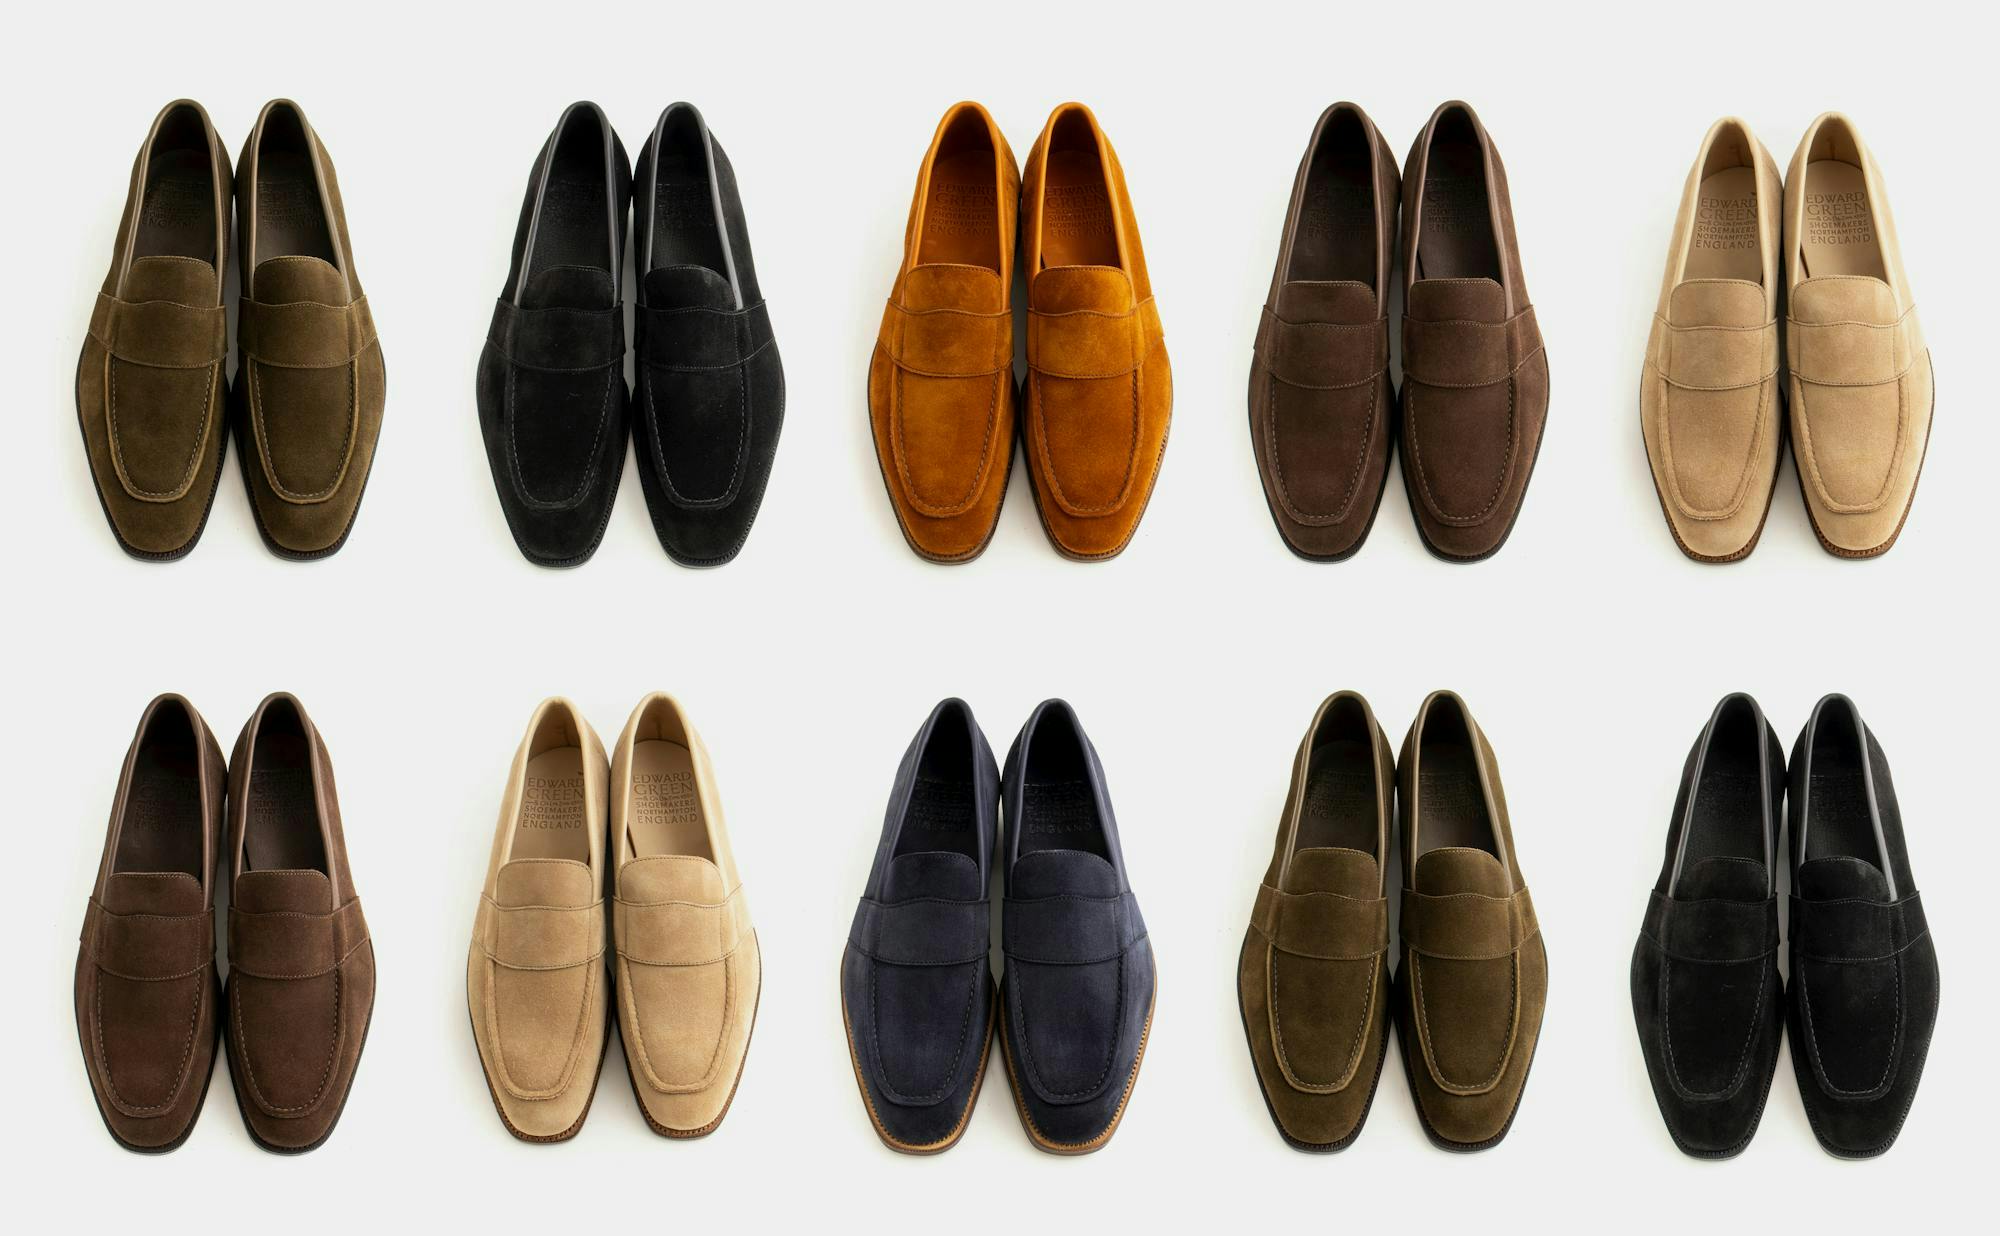 The Edward Green Buckingham loafer in several different shades of suede.